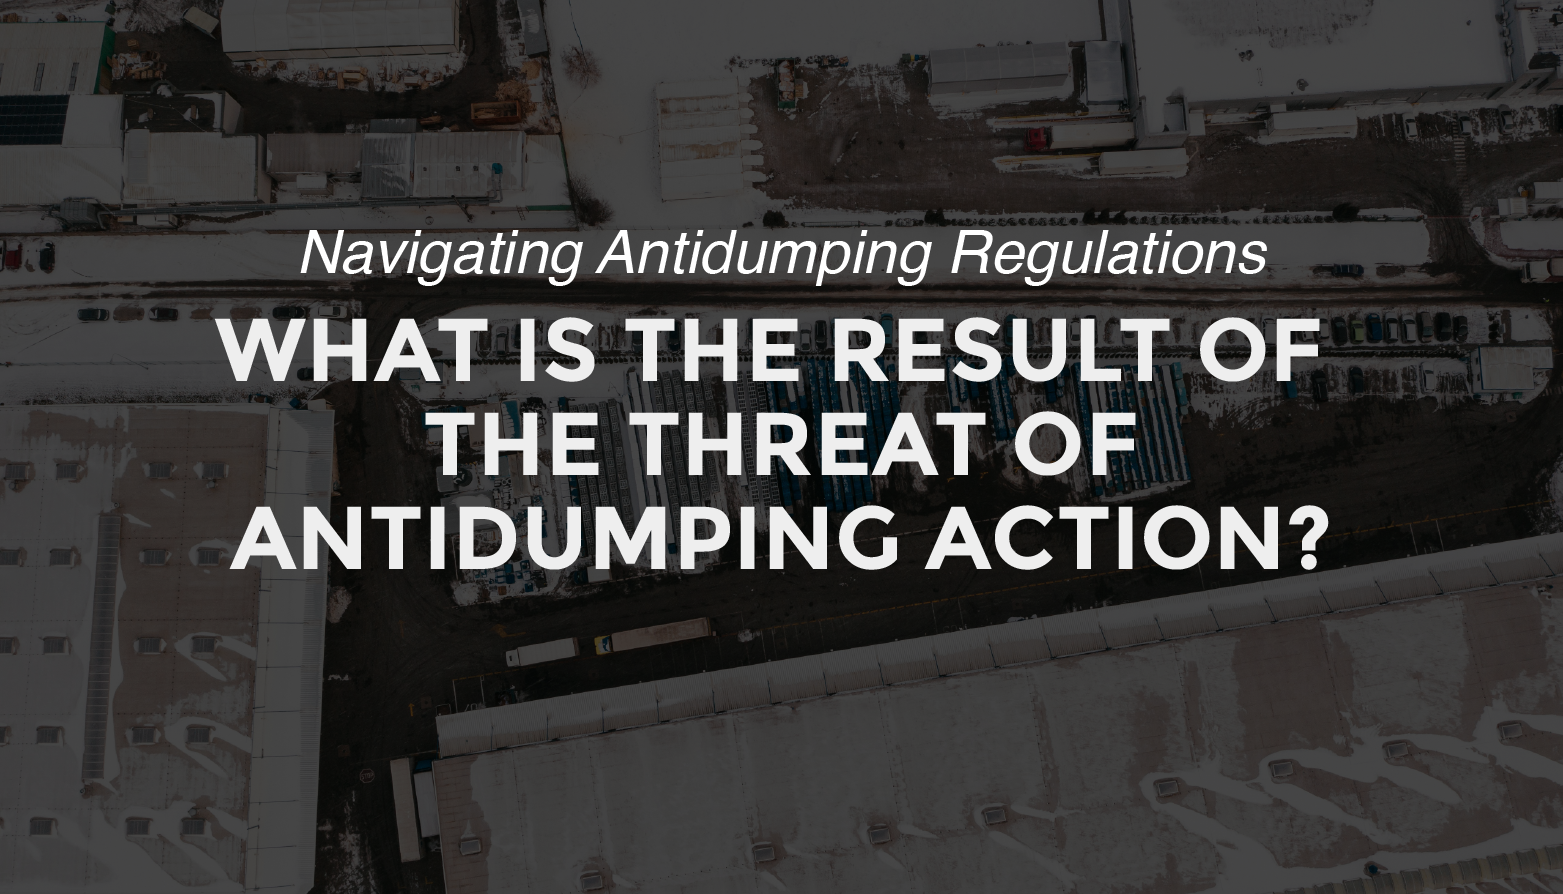 What is the result of the threat of antidumping action?